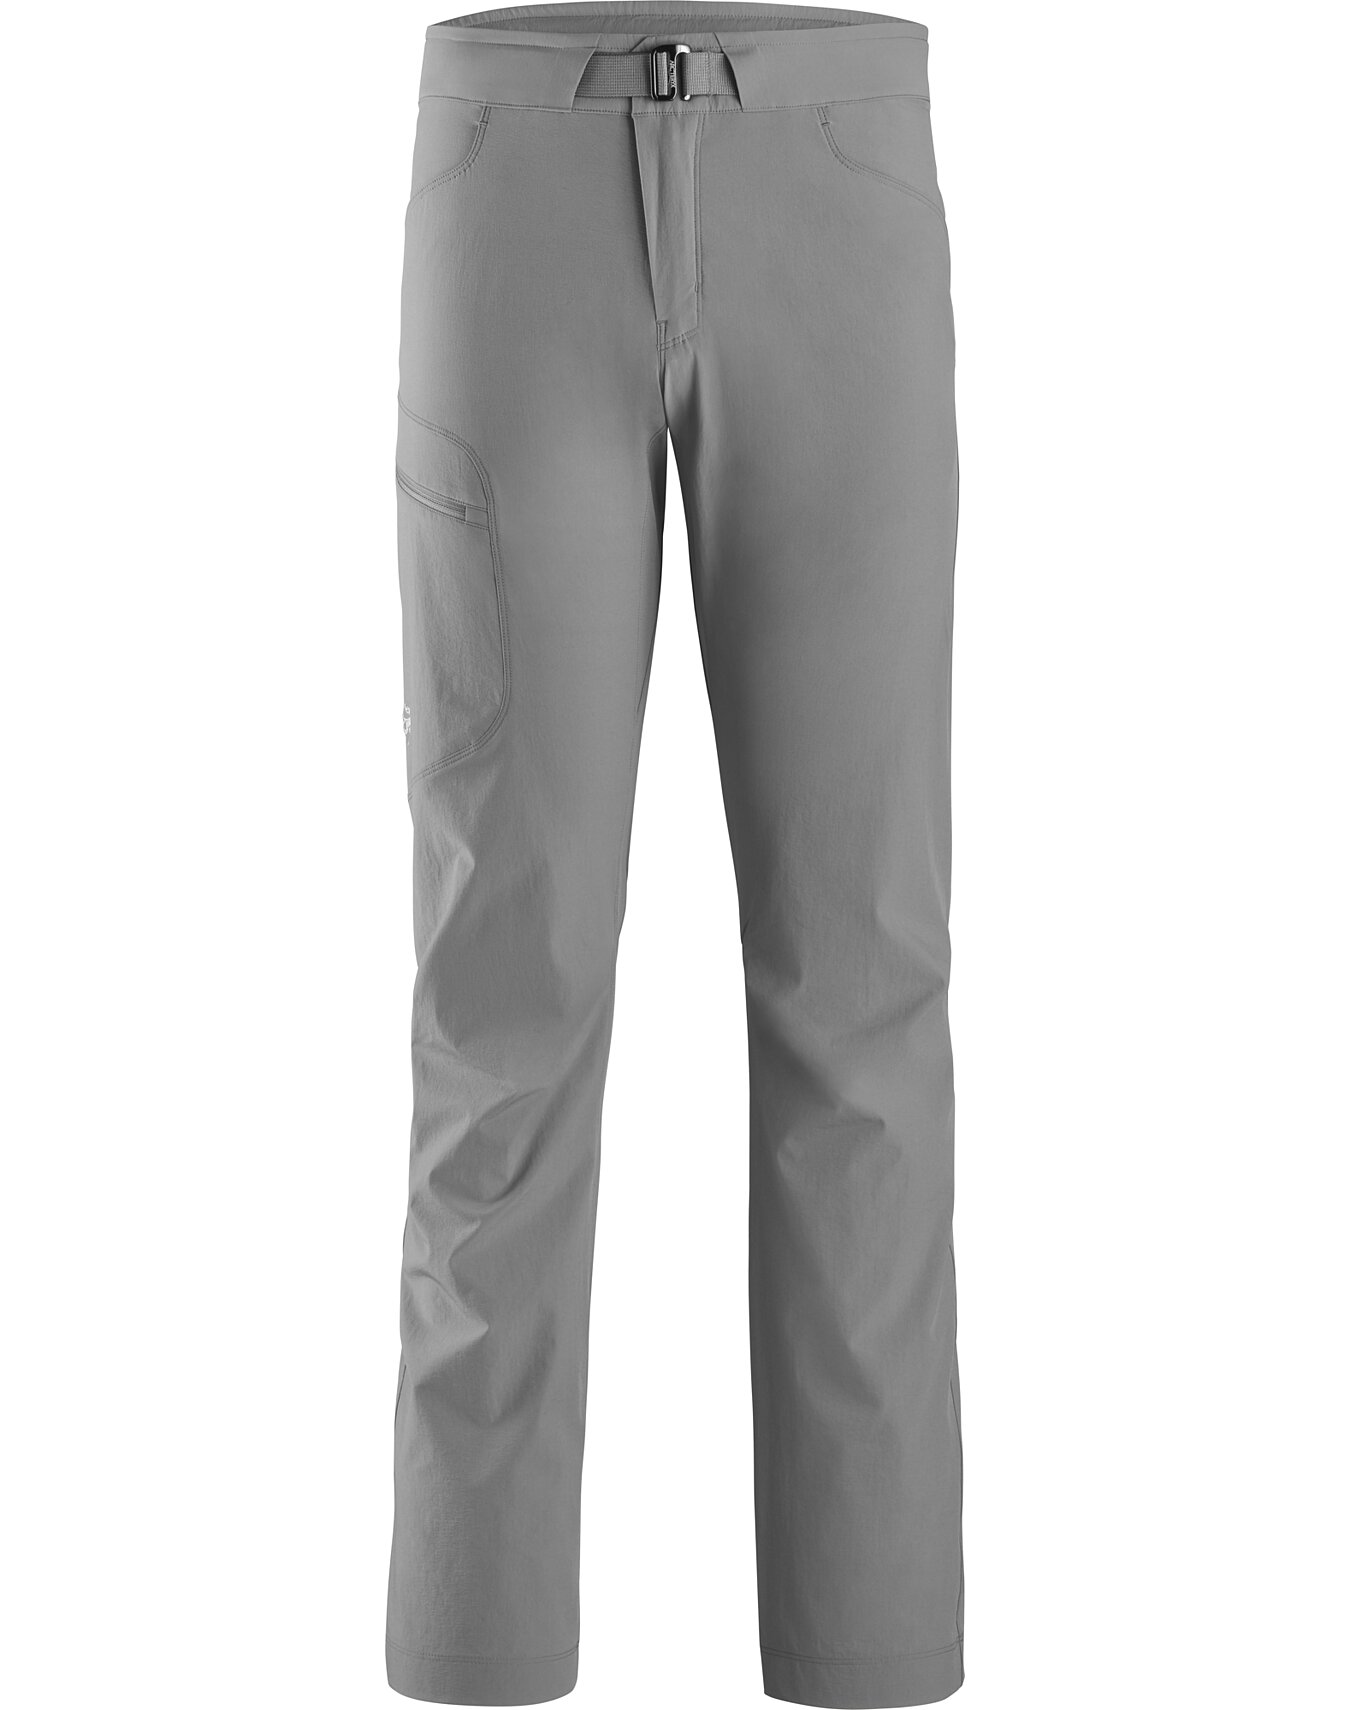 lightweight ladies trousers for hot countries